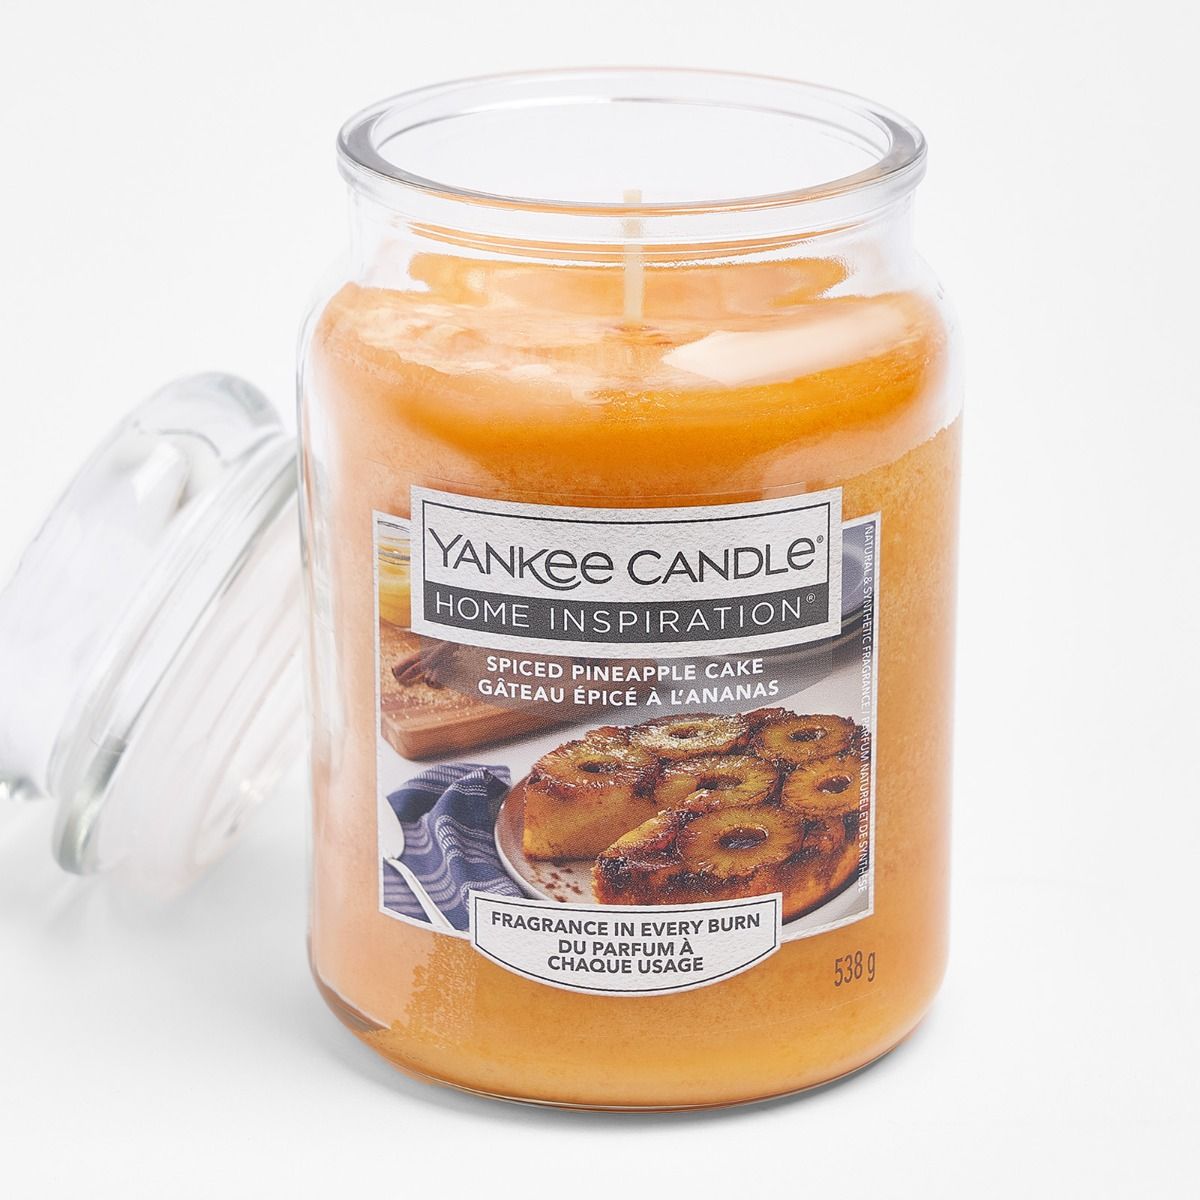 Yankee Candle Home Inspiration Large Jar - Spiced Pineapple Cake